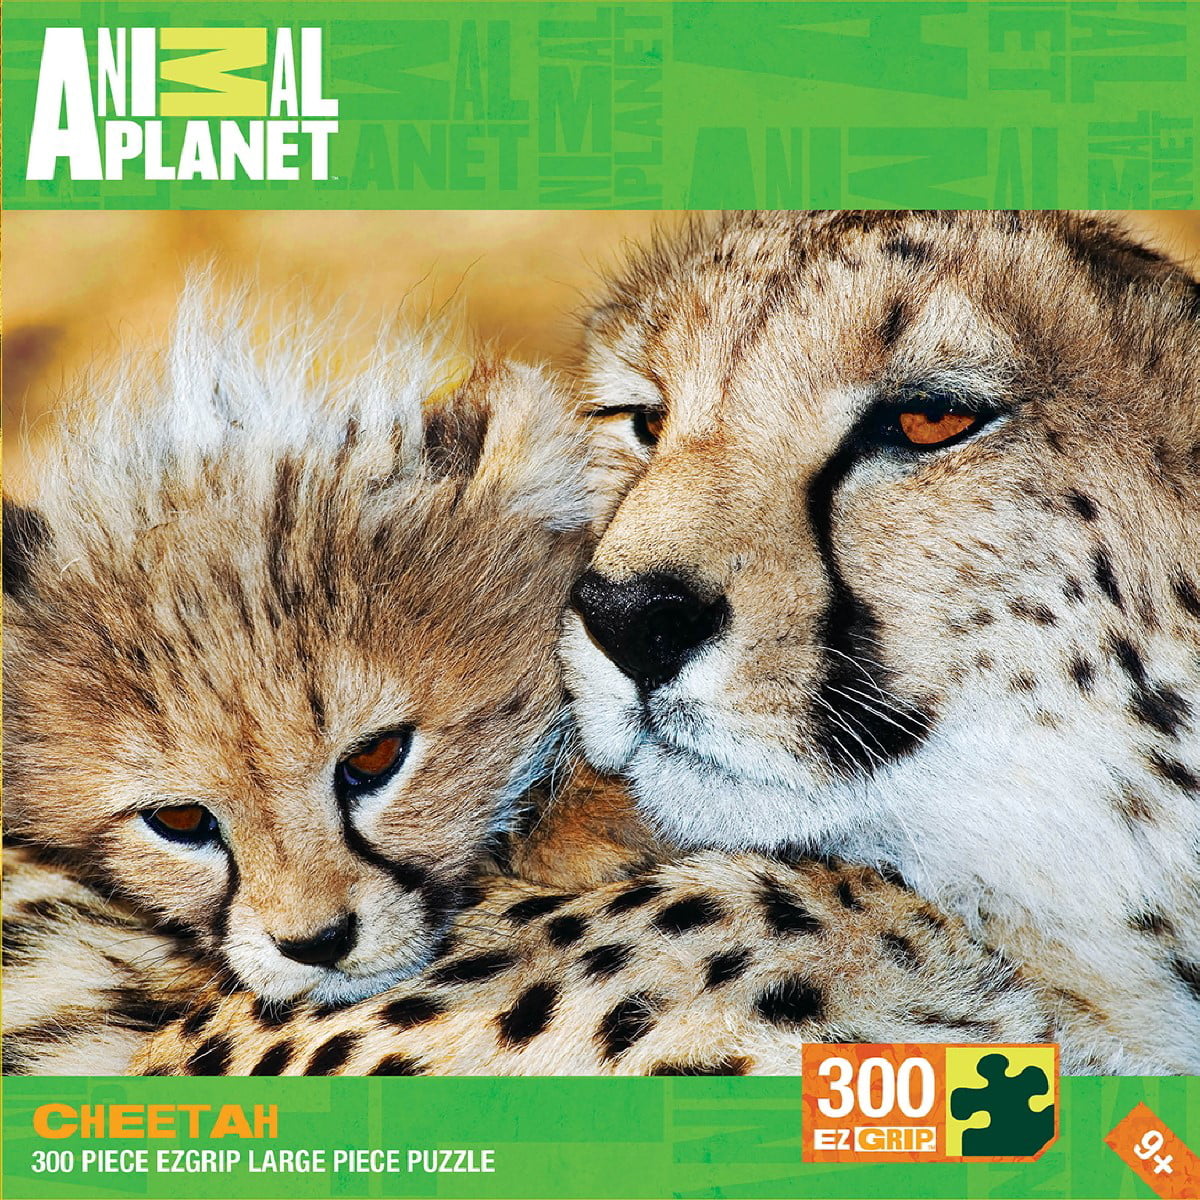 Animal Planet Cheetah 300 Piece Puzzle, Big Cats by Masterpieces Puzzle Co.  